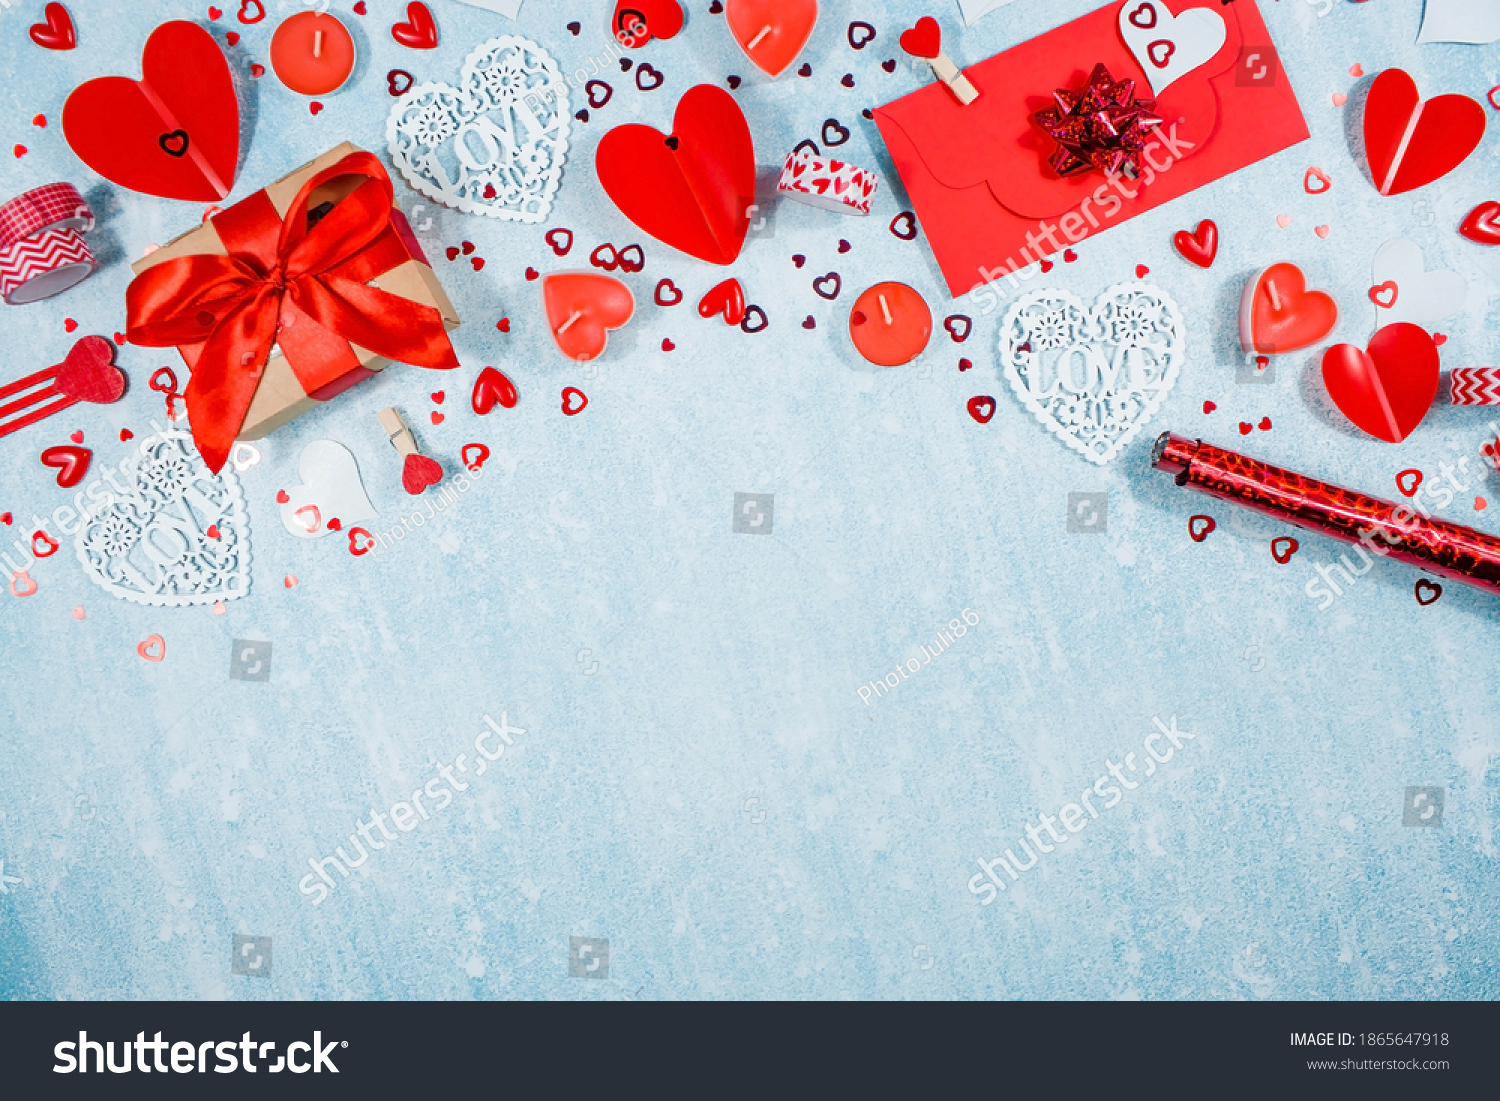 Greeting card for Valentine's Day. Red hearts, gift box, roses and candles on a blue background. Beautiful frame for text. Flatly. Copy the space. The concept of holiday and love. #1865647918